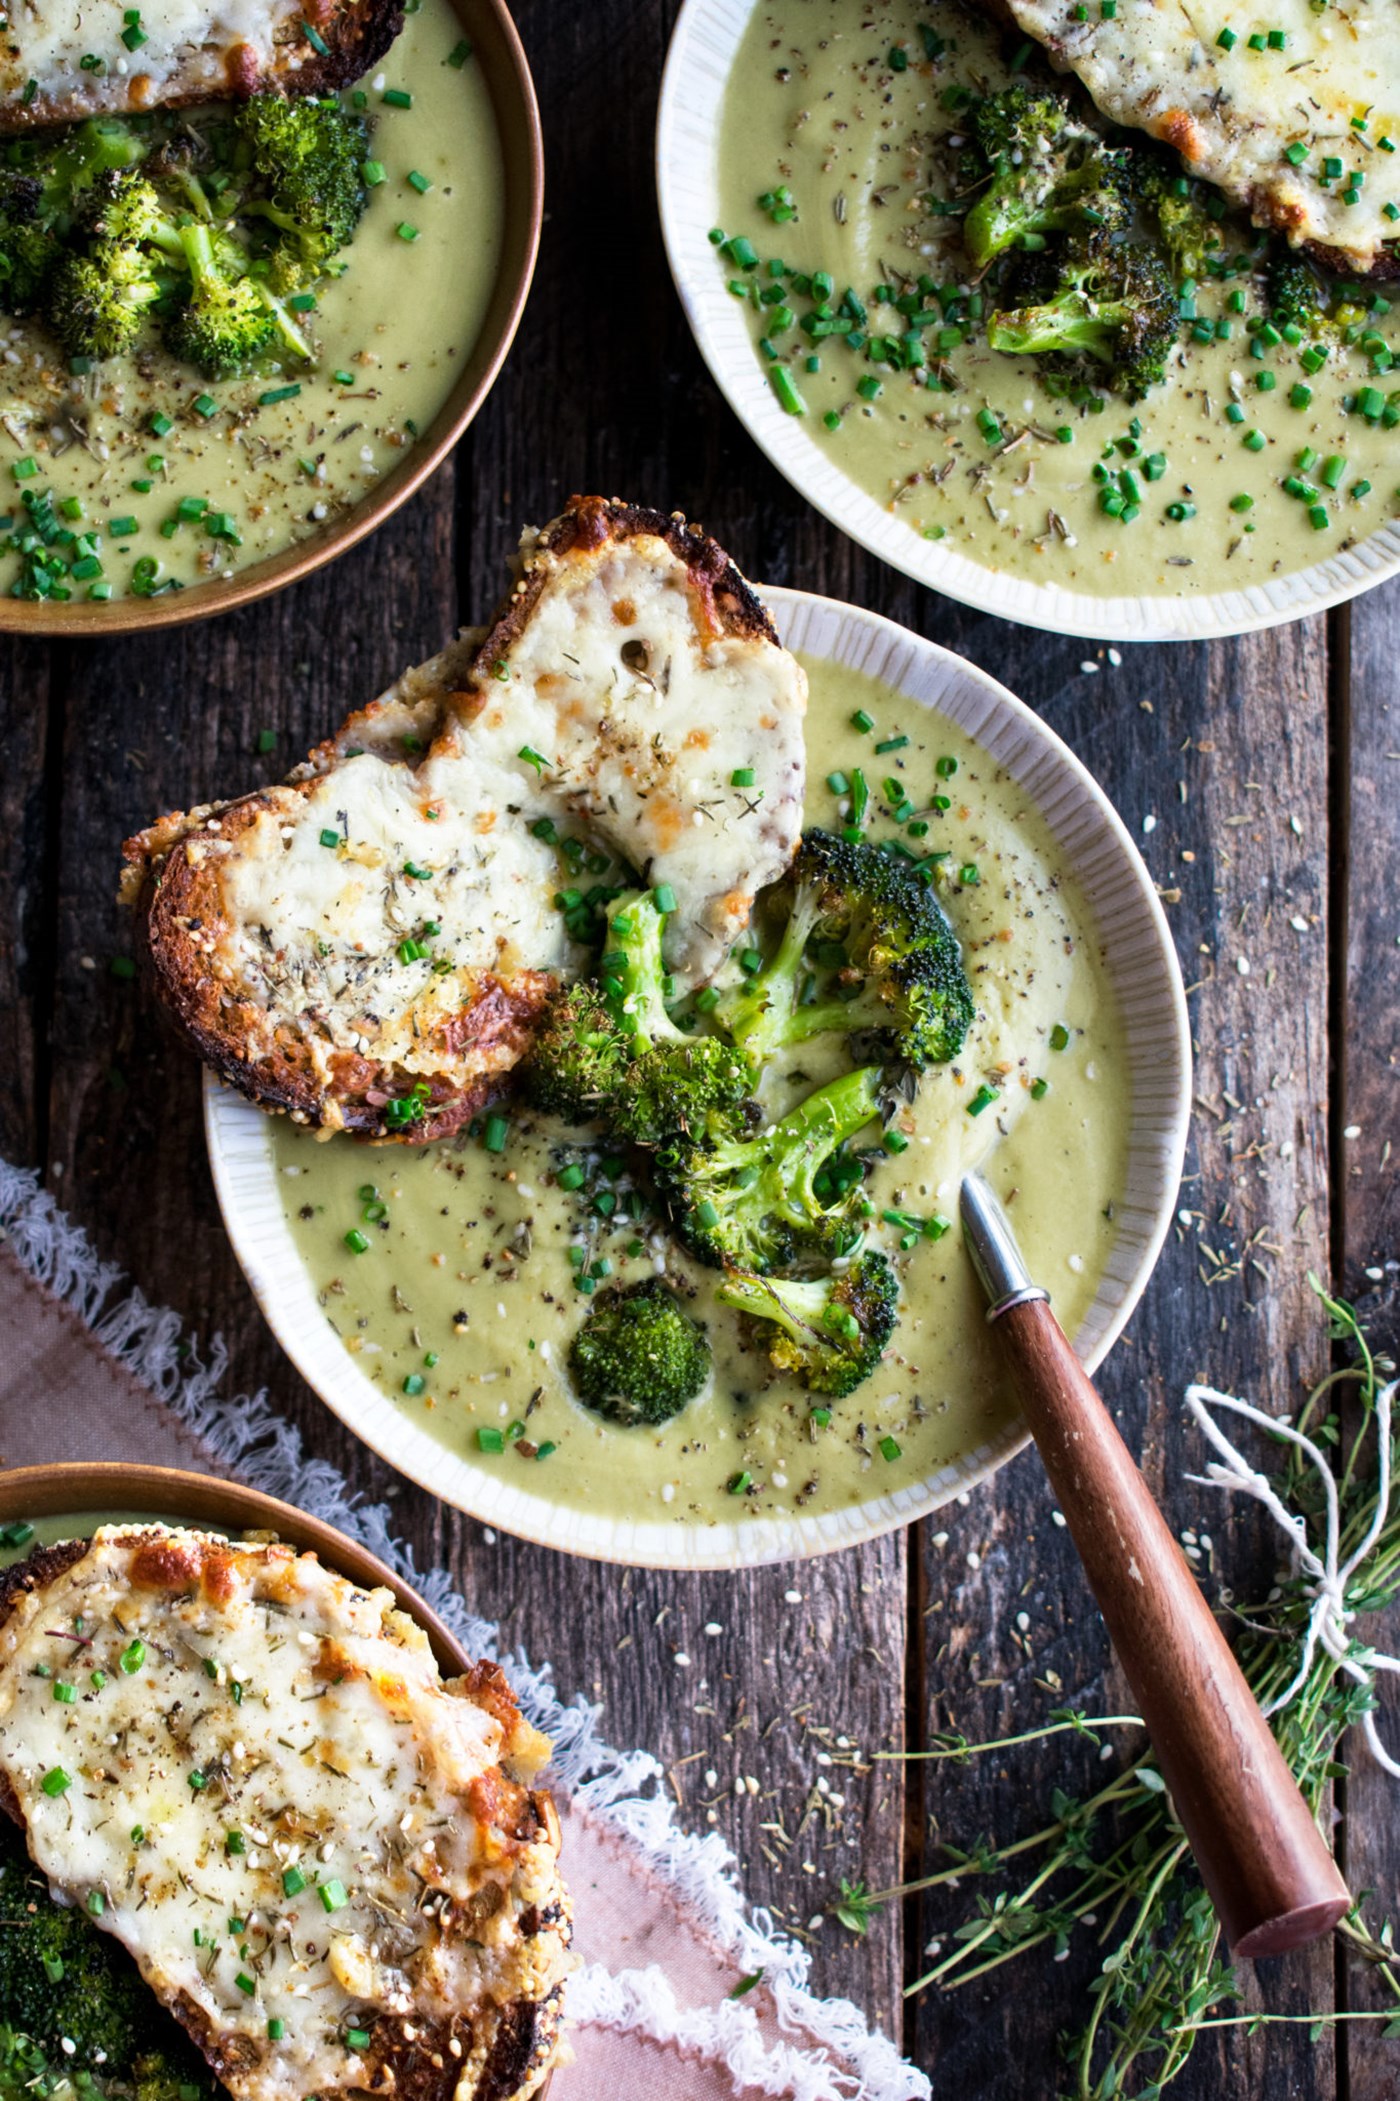 Roasted Broccoli Soup with Melted Cheddar Croutons (Credit: The Original Dish)